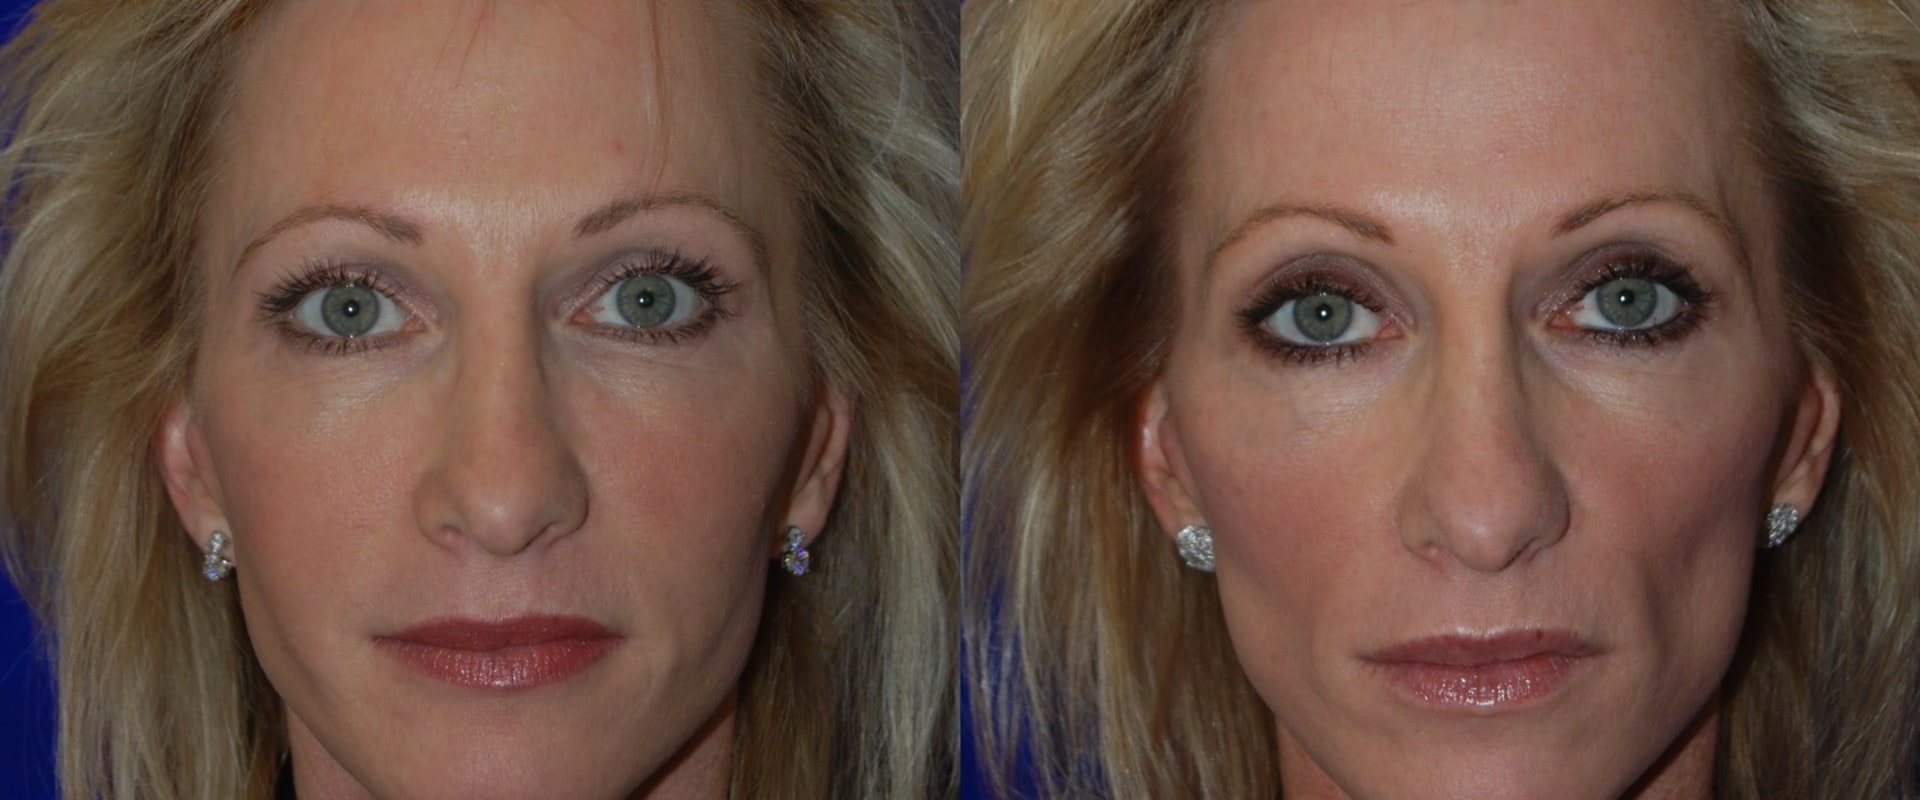 Juvederm vs Voluma: Which is Better for You?